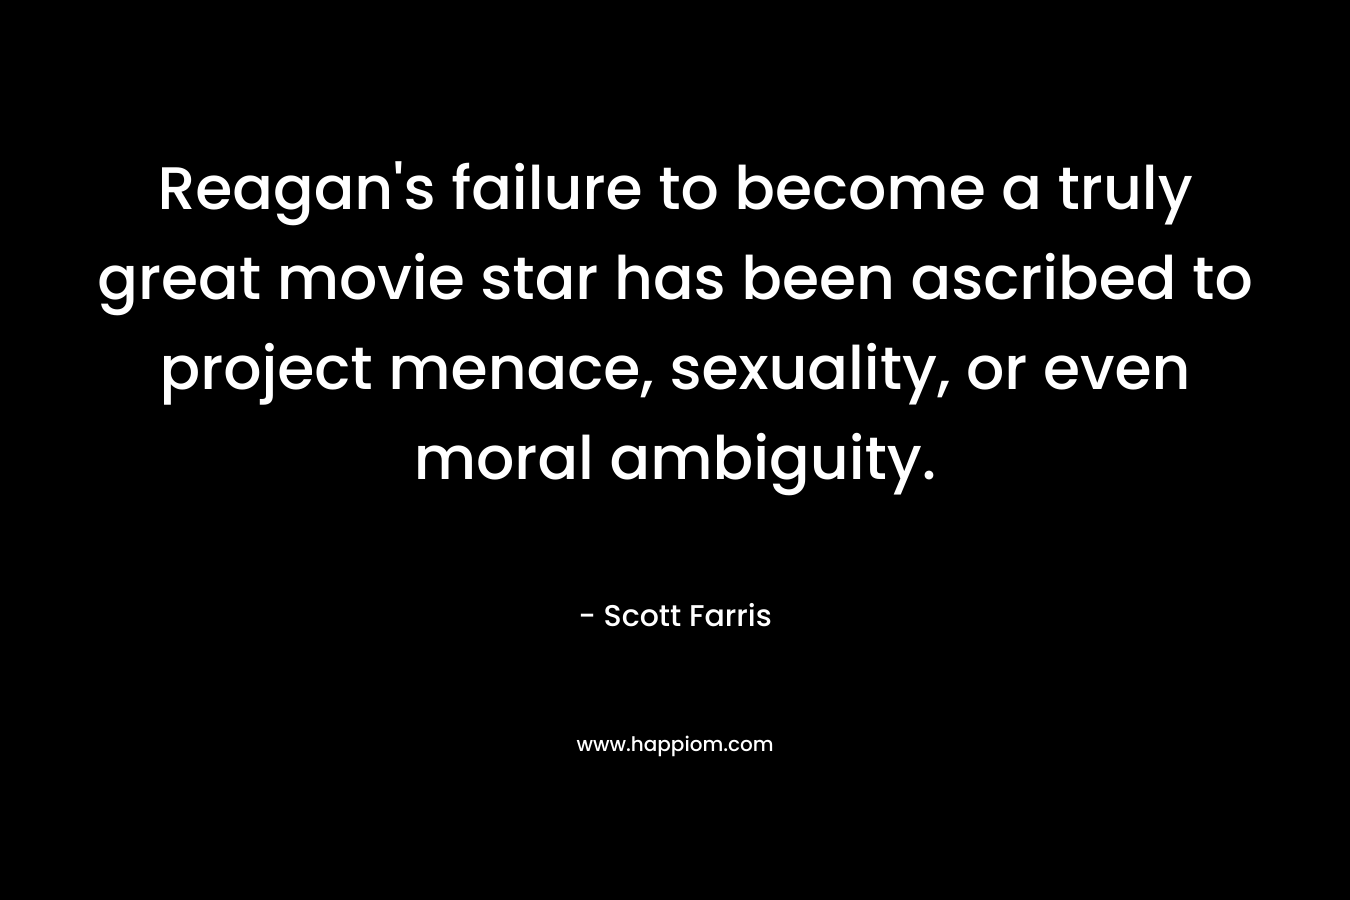 Reagan's failure to become a truly great movie star has been ascribed to project menace, sexuality, or even moral ambiguity.